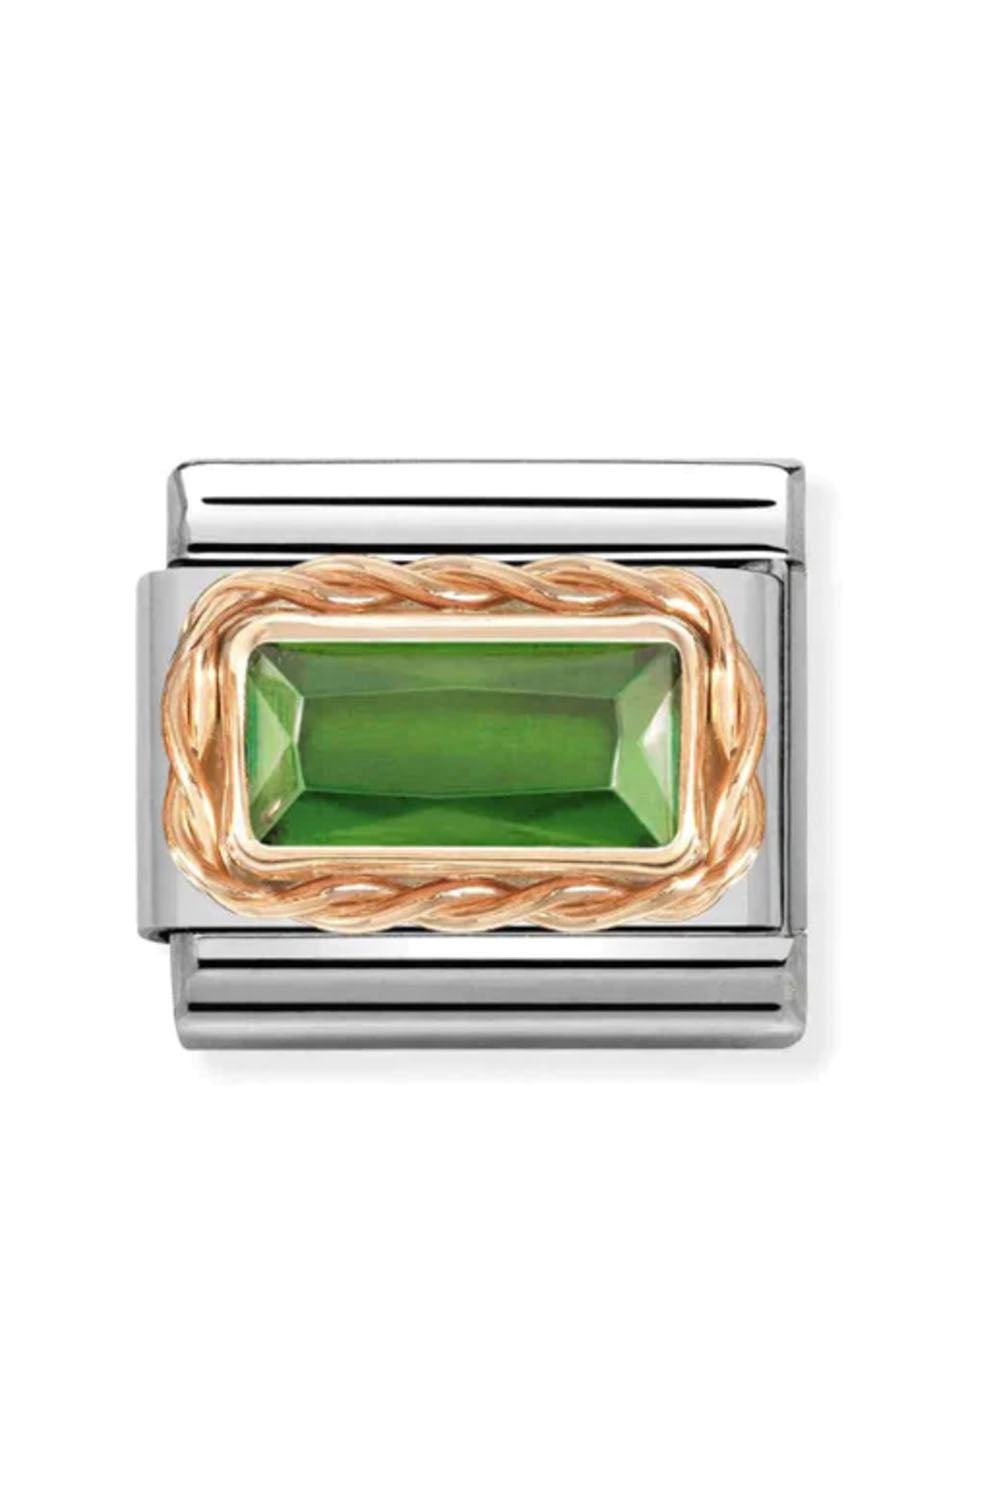 FACETED BAGUETTE RICH SETTING 9k rose gold and CZ Green